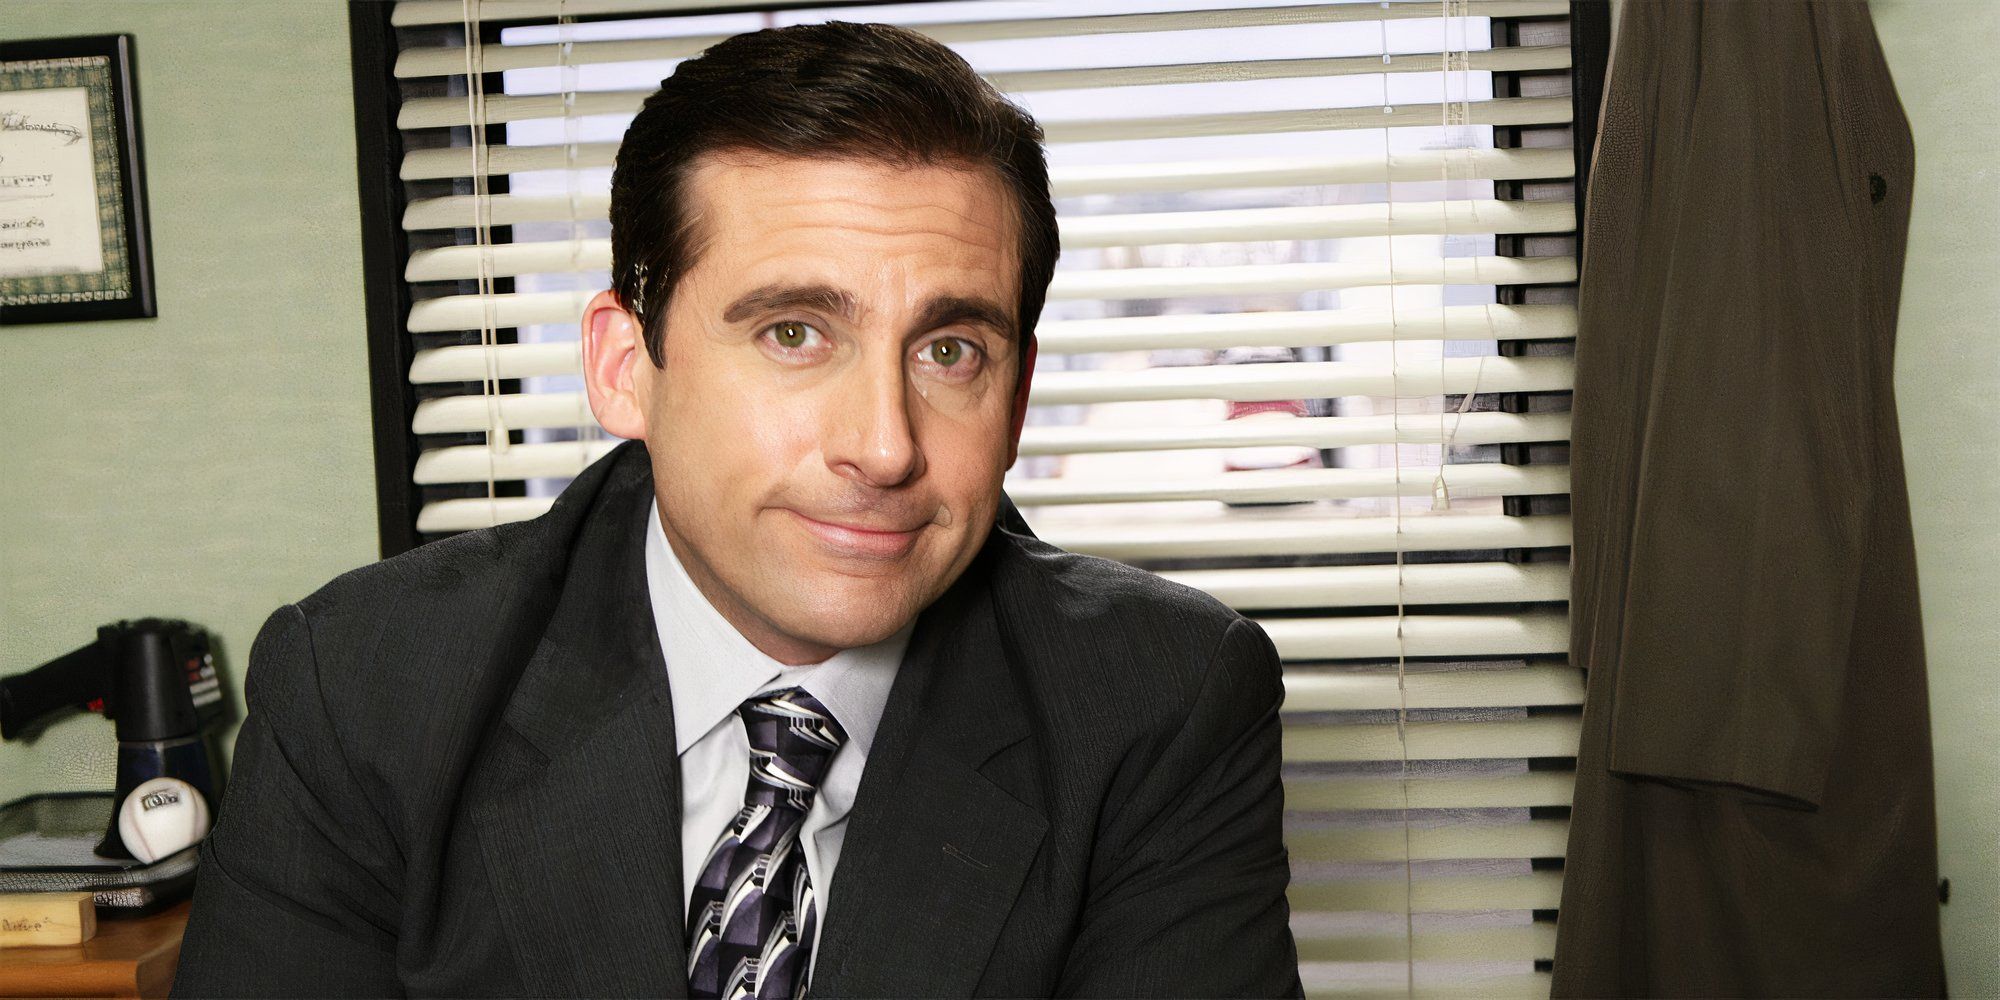 Steve Carrell as Michael Scott smiling to camera in The Office